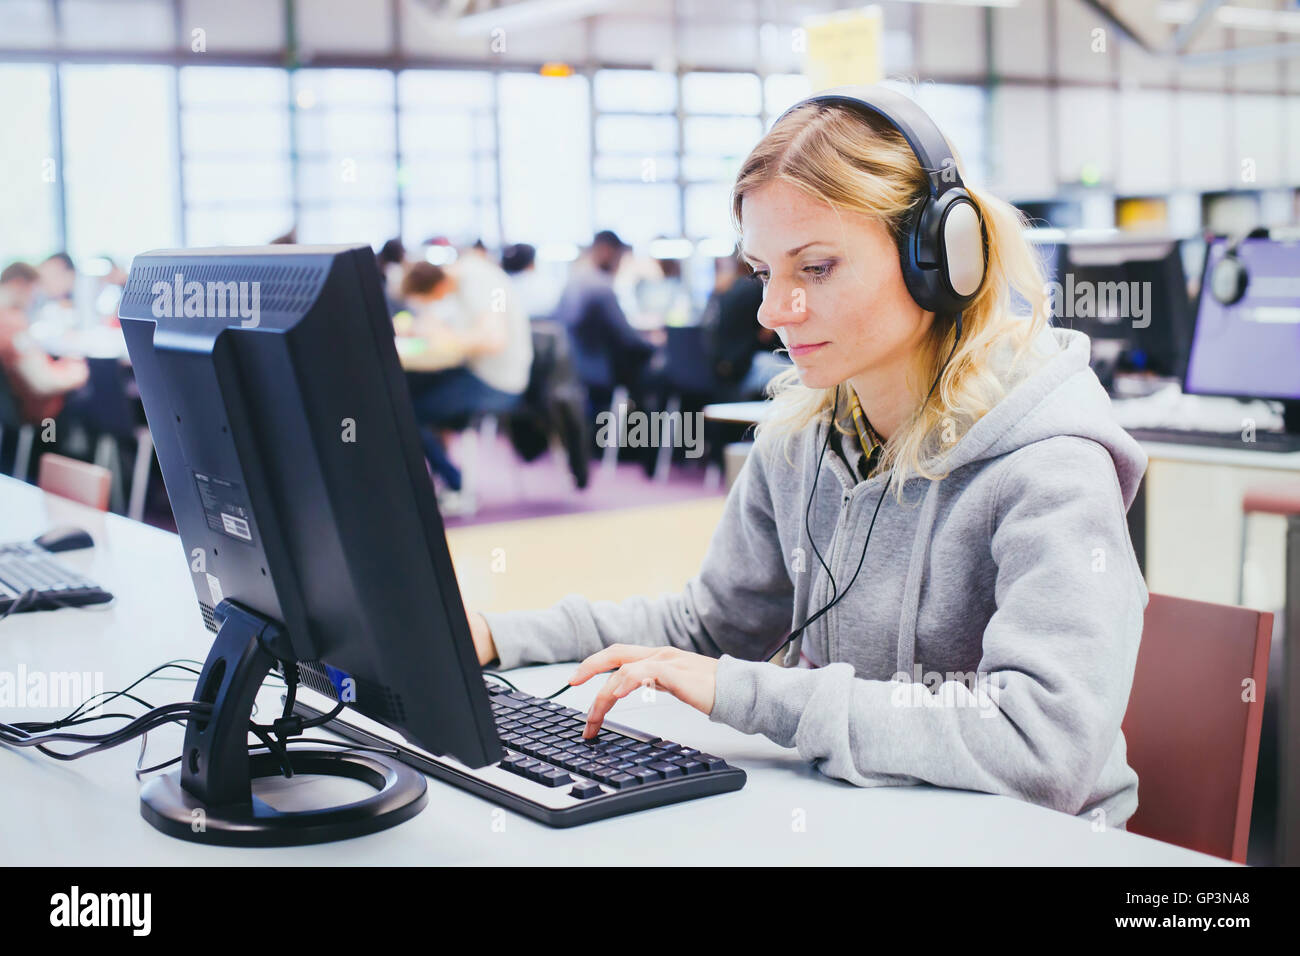 adult education, middle aged woman studying on computer in modern library Stock Photo